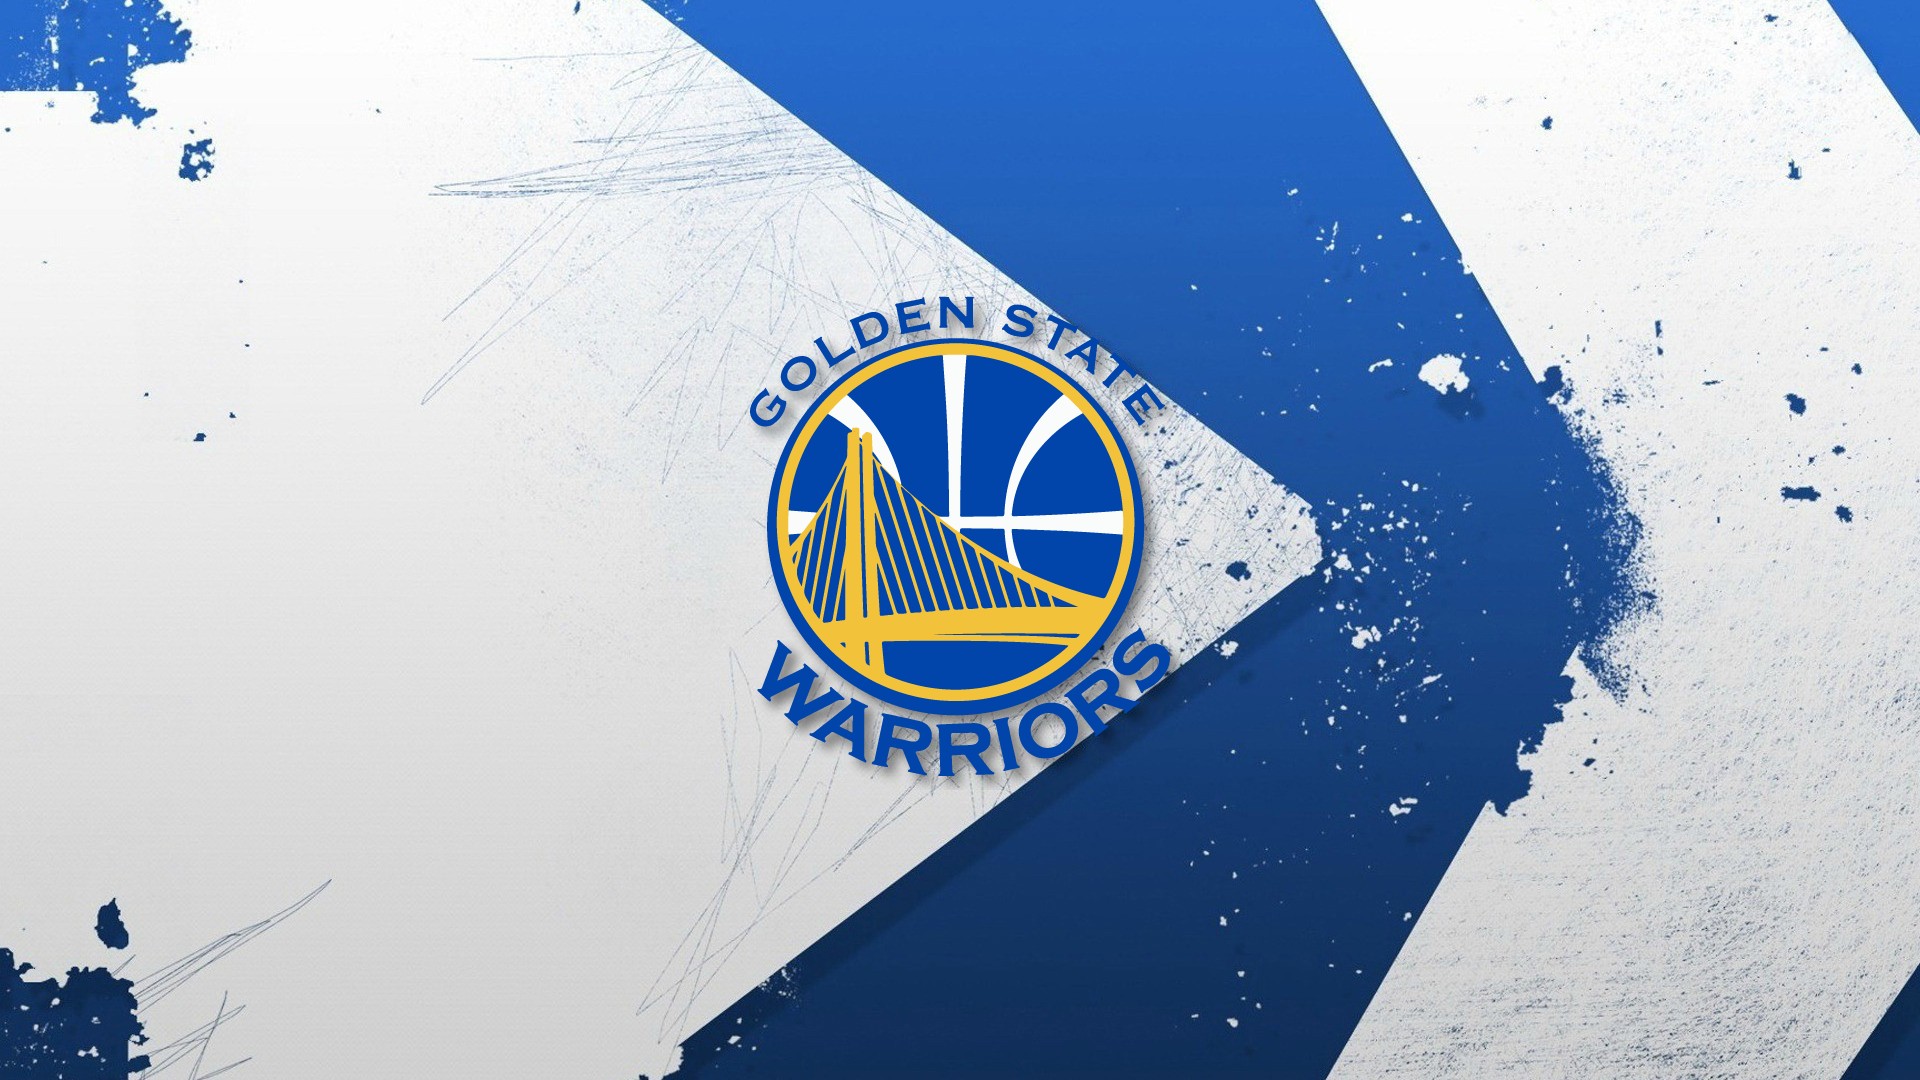 HD Golden State Warriors NBA Backgrounds with image dimensions 1920X1080 pixel. You can make this wallpaper for your Desktop Computer Backgrounds, Windows or Mac Screensavers, iPhone Lock screen, Tablet or Android and another Mobile Phone device